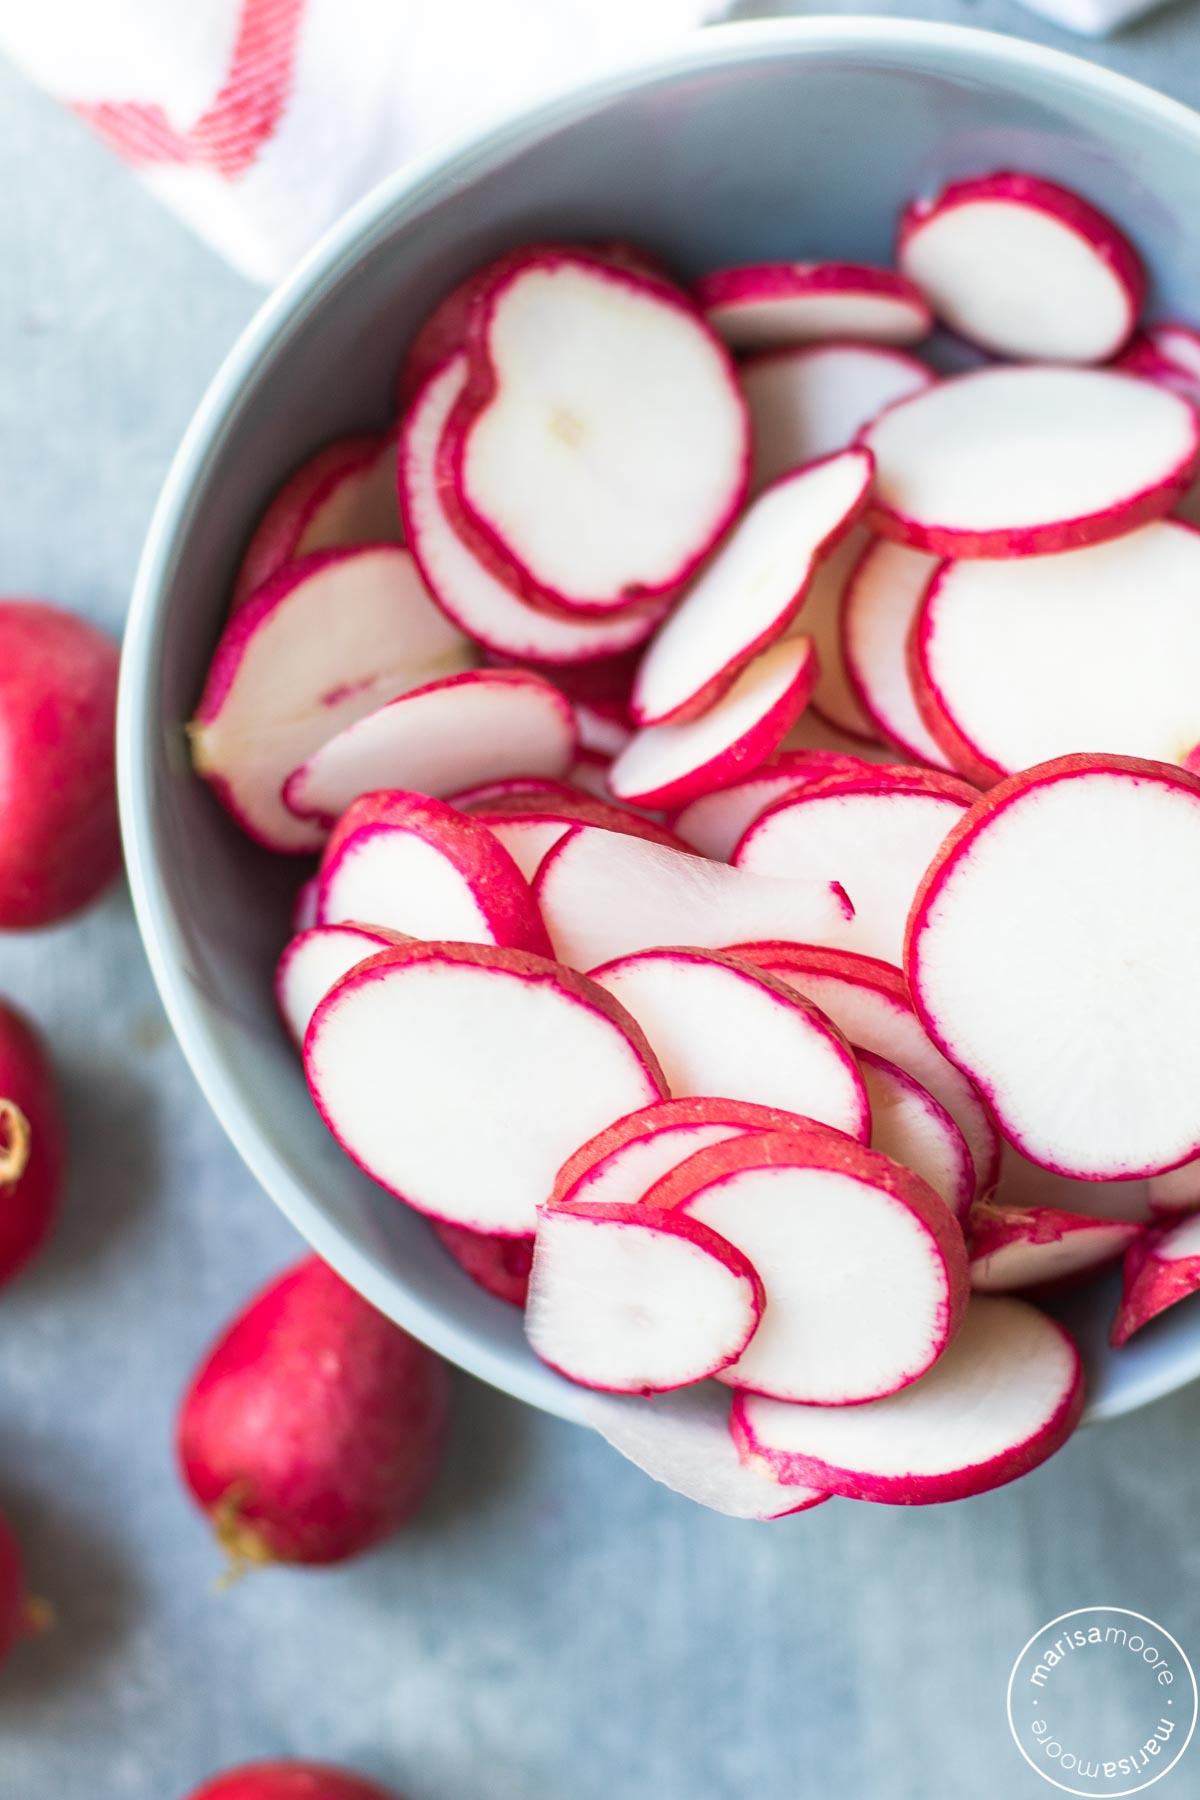 Sliced radishes in a blue bowl